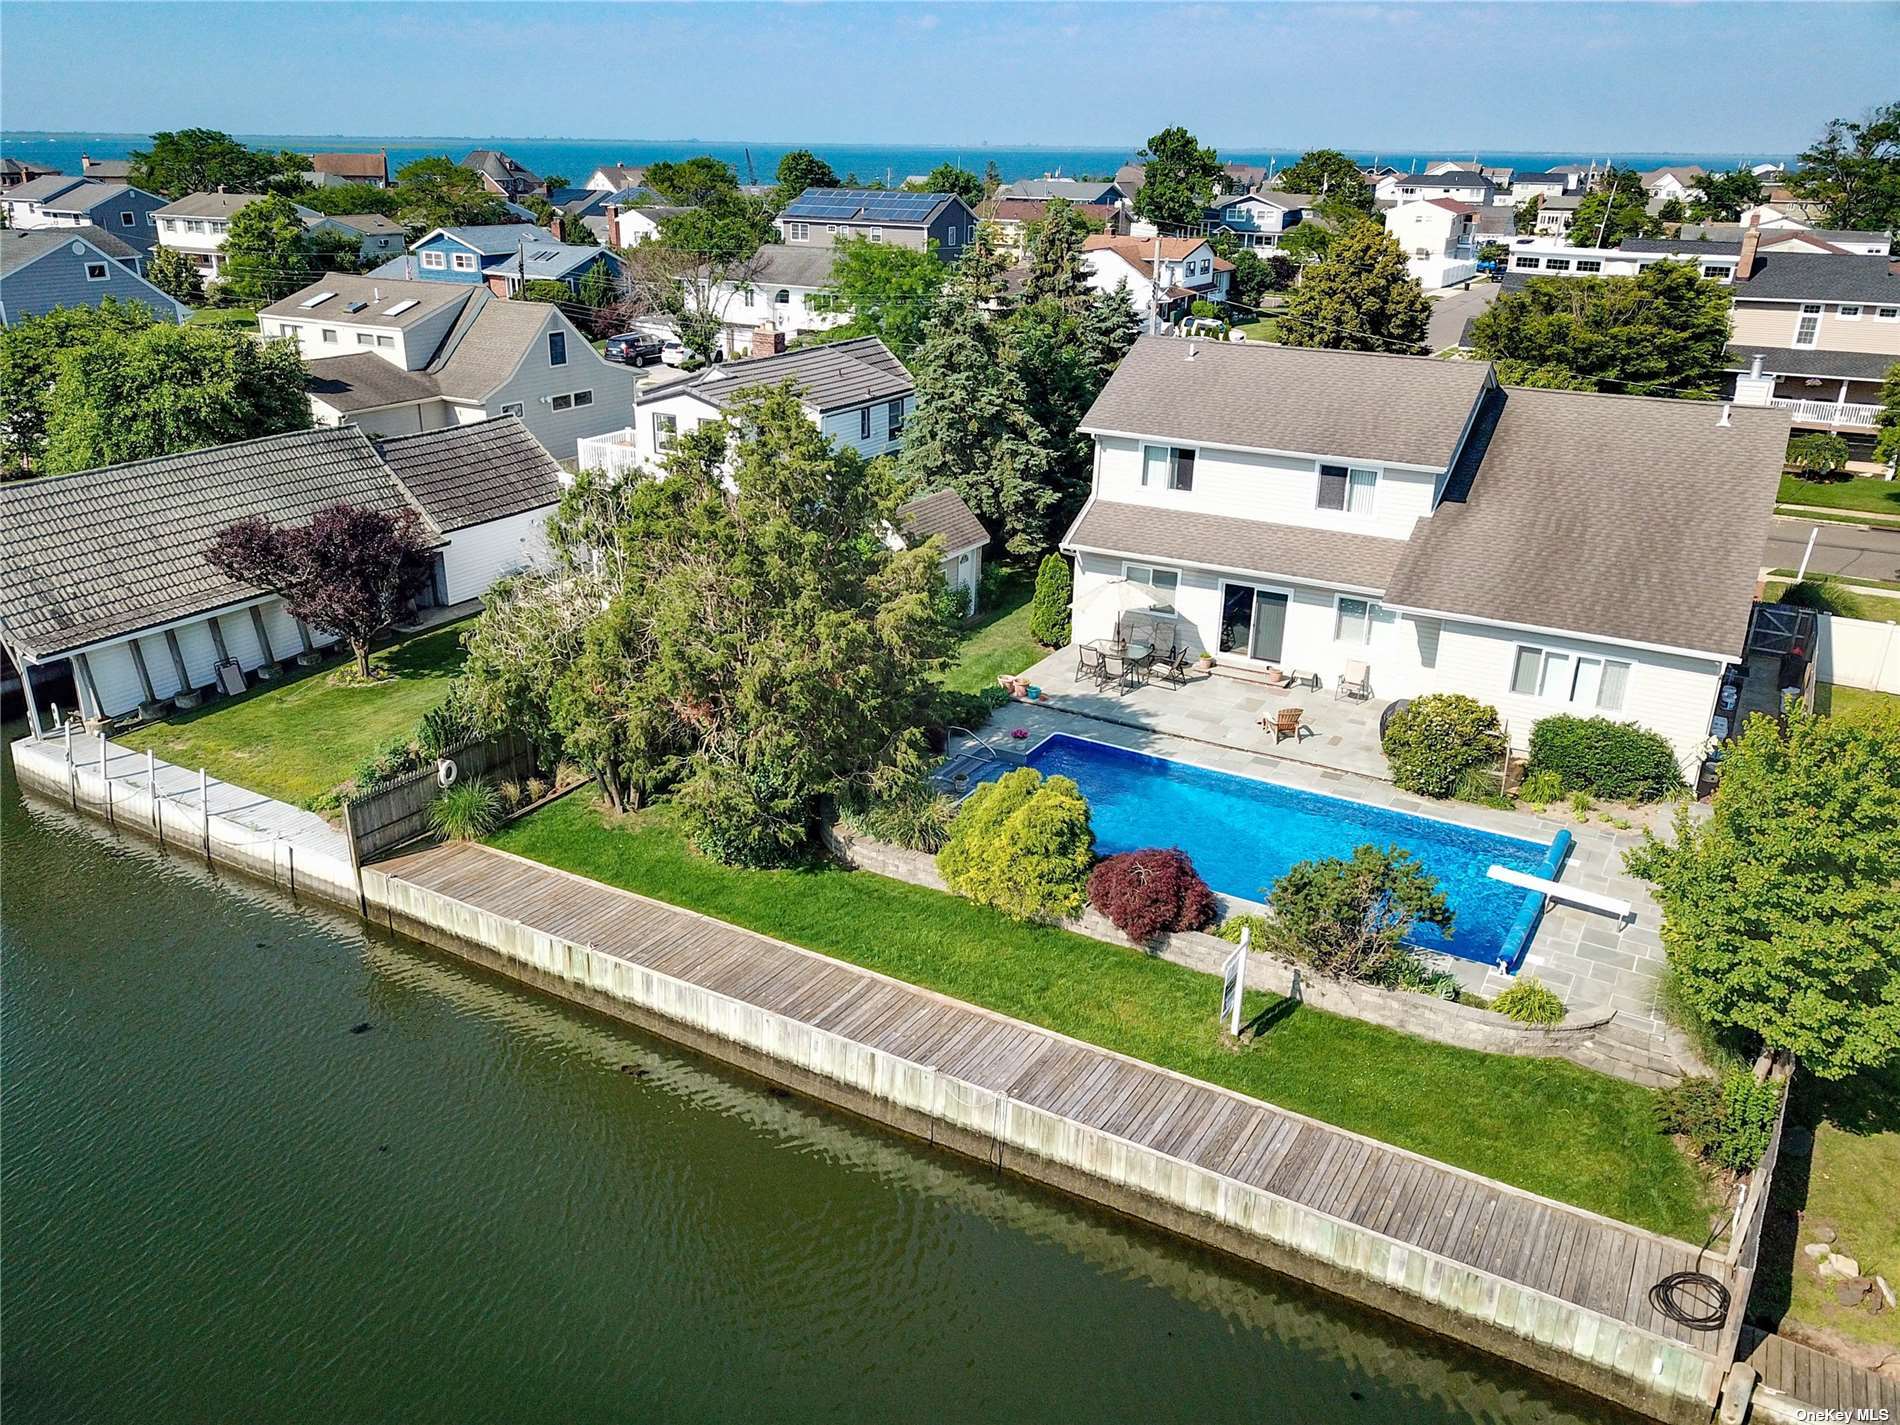 an aerial view of a house with a garden lake view